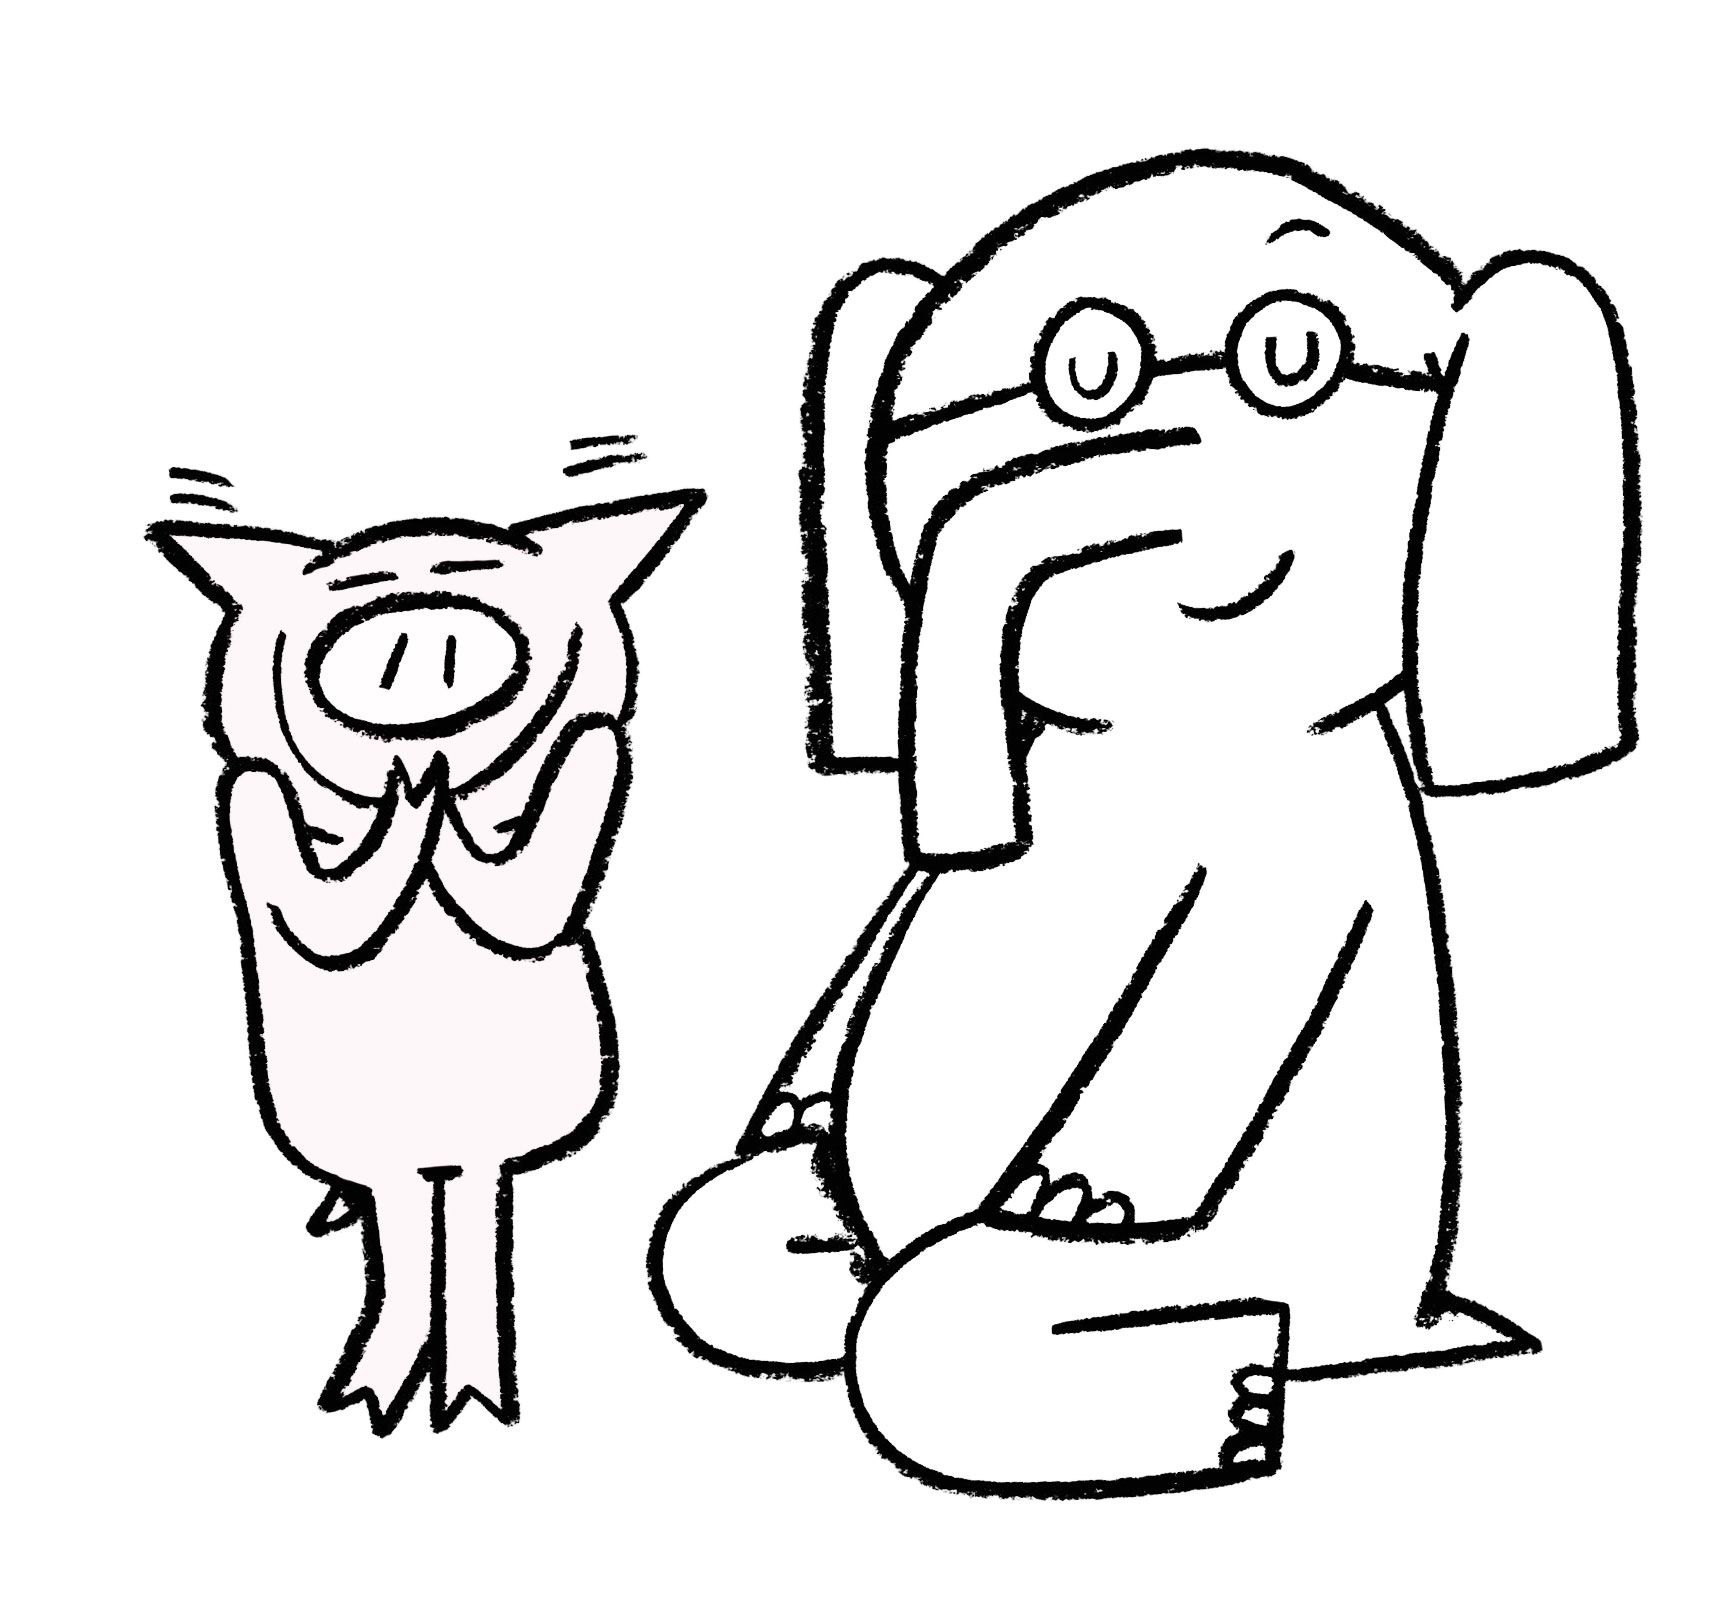 Elephant and piggie coloring page mo willems piggie and elephant preschool coloring pages